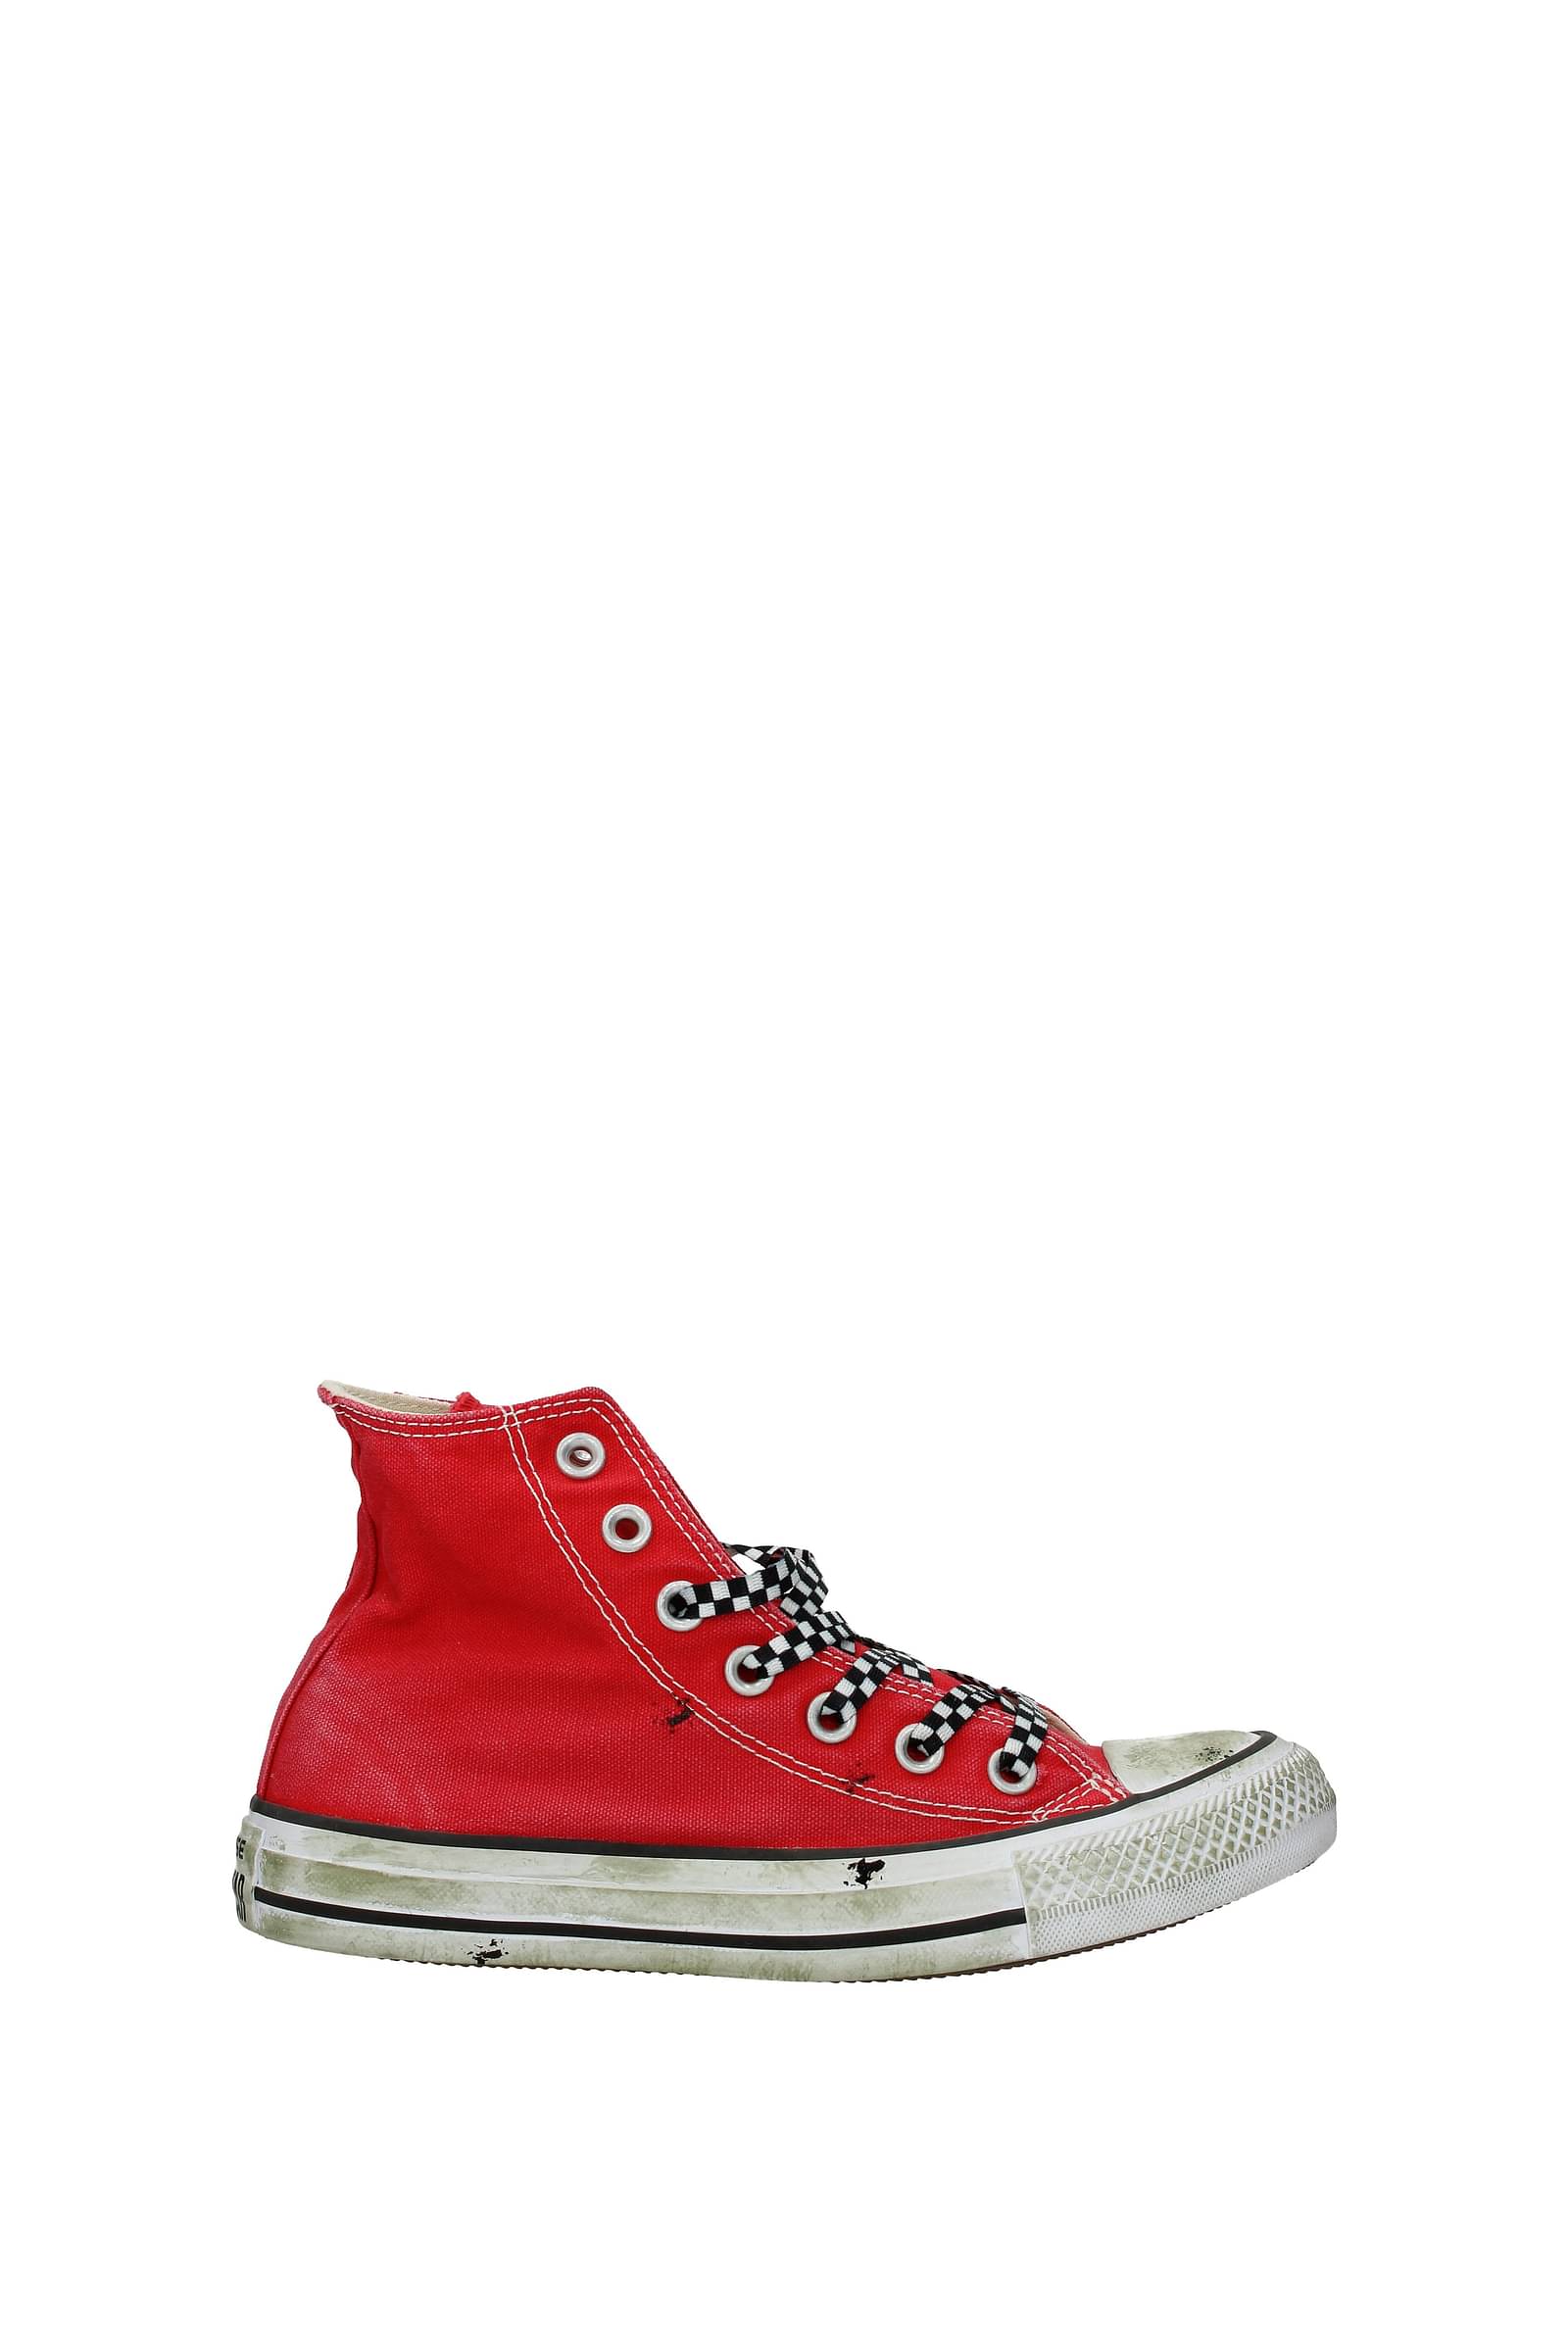 Converse Sneakers limited edition Women 